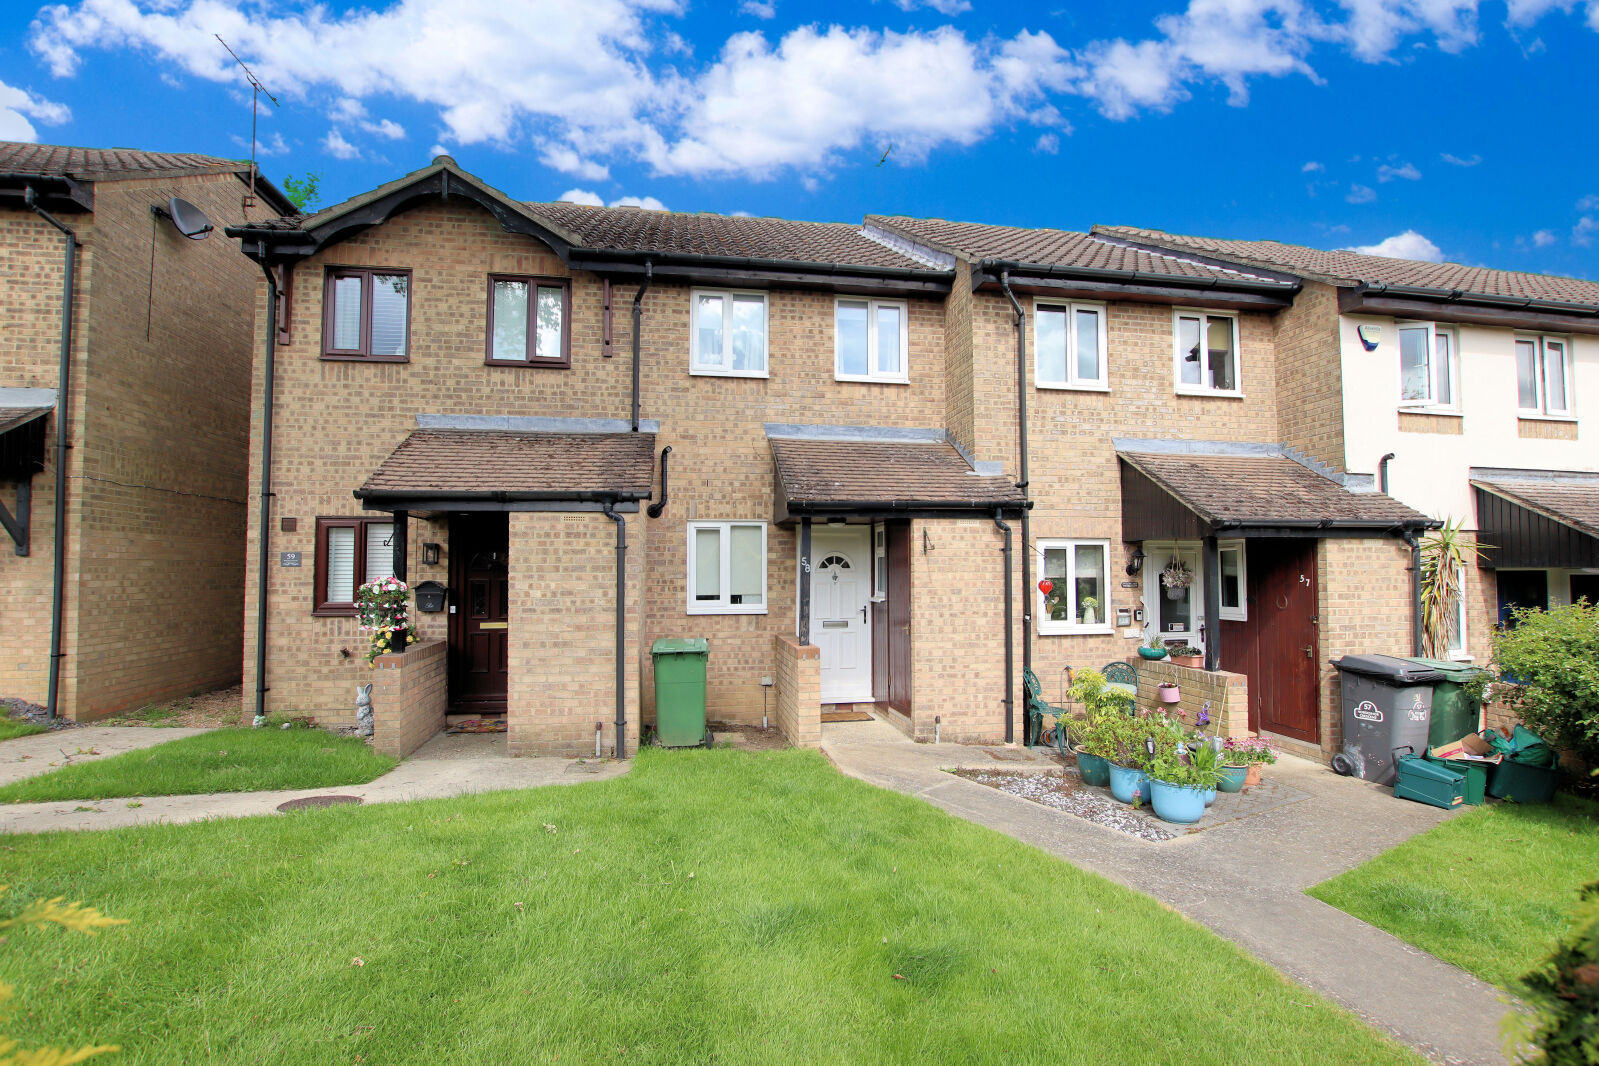 2 bedroom mid terraced house for sale Horseshoe Crescent, Burghfield Common, RG7, main image